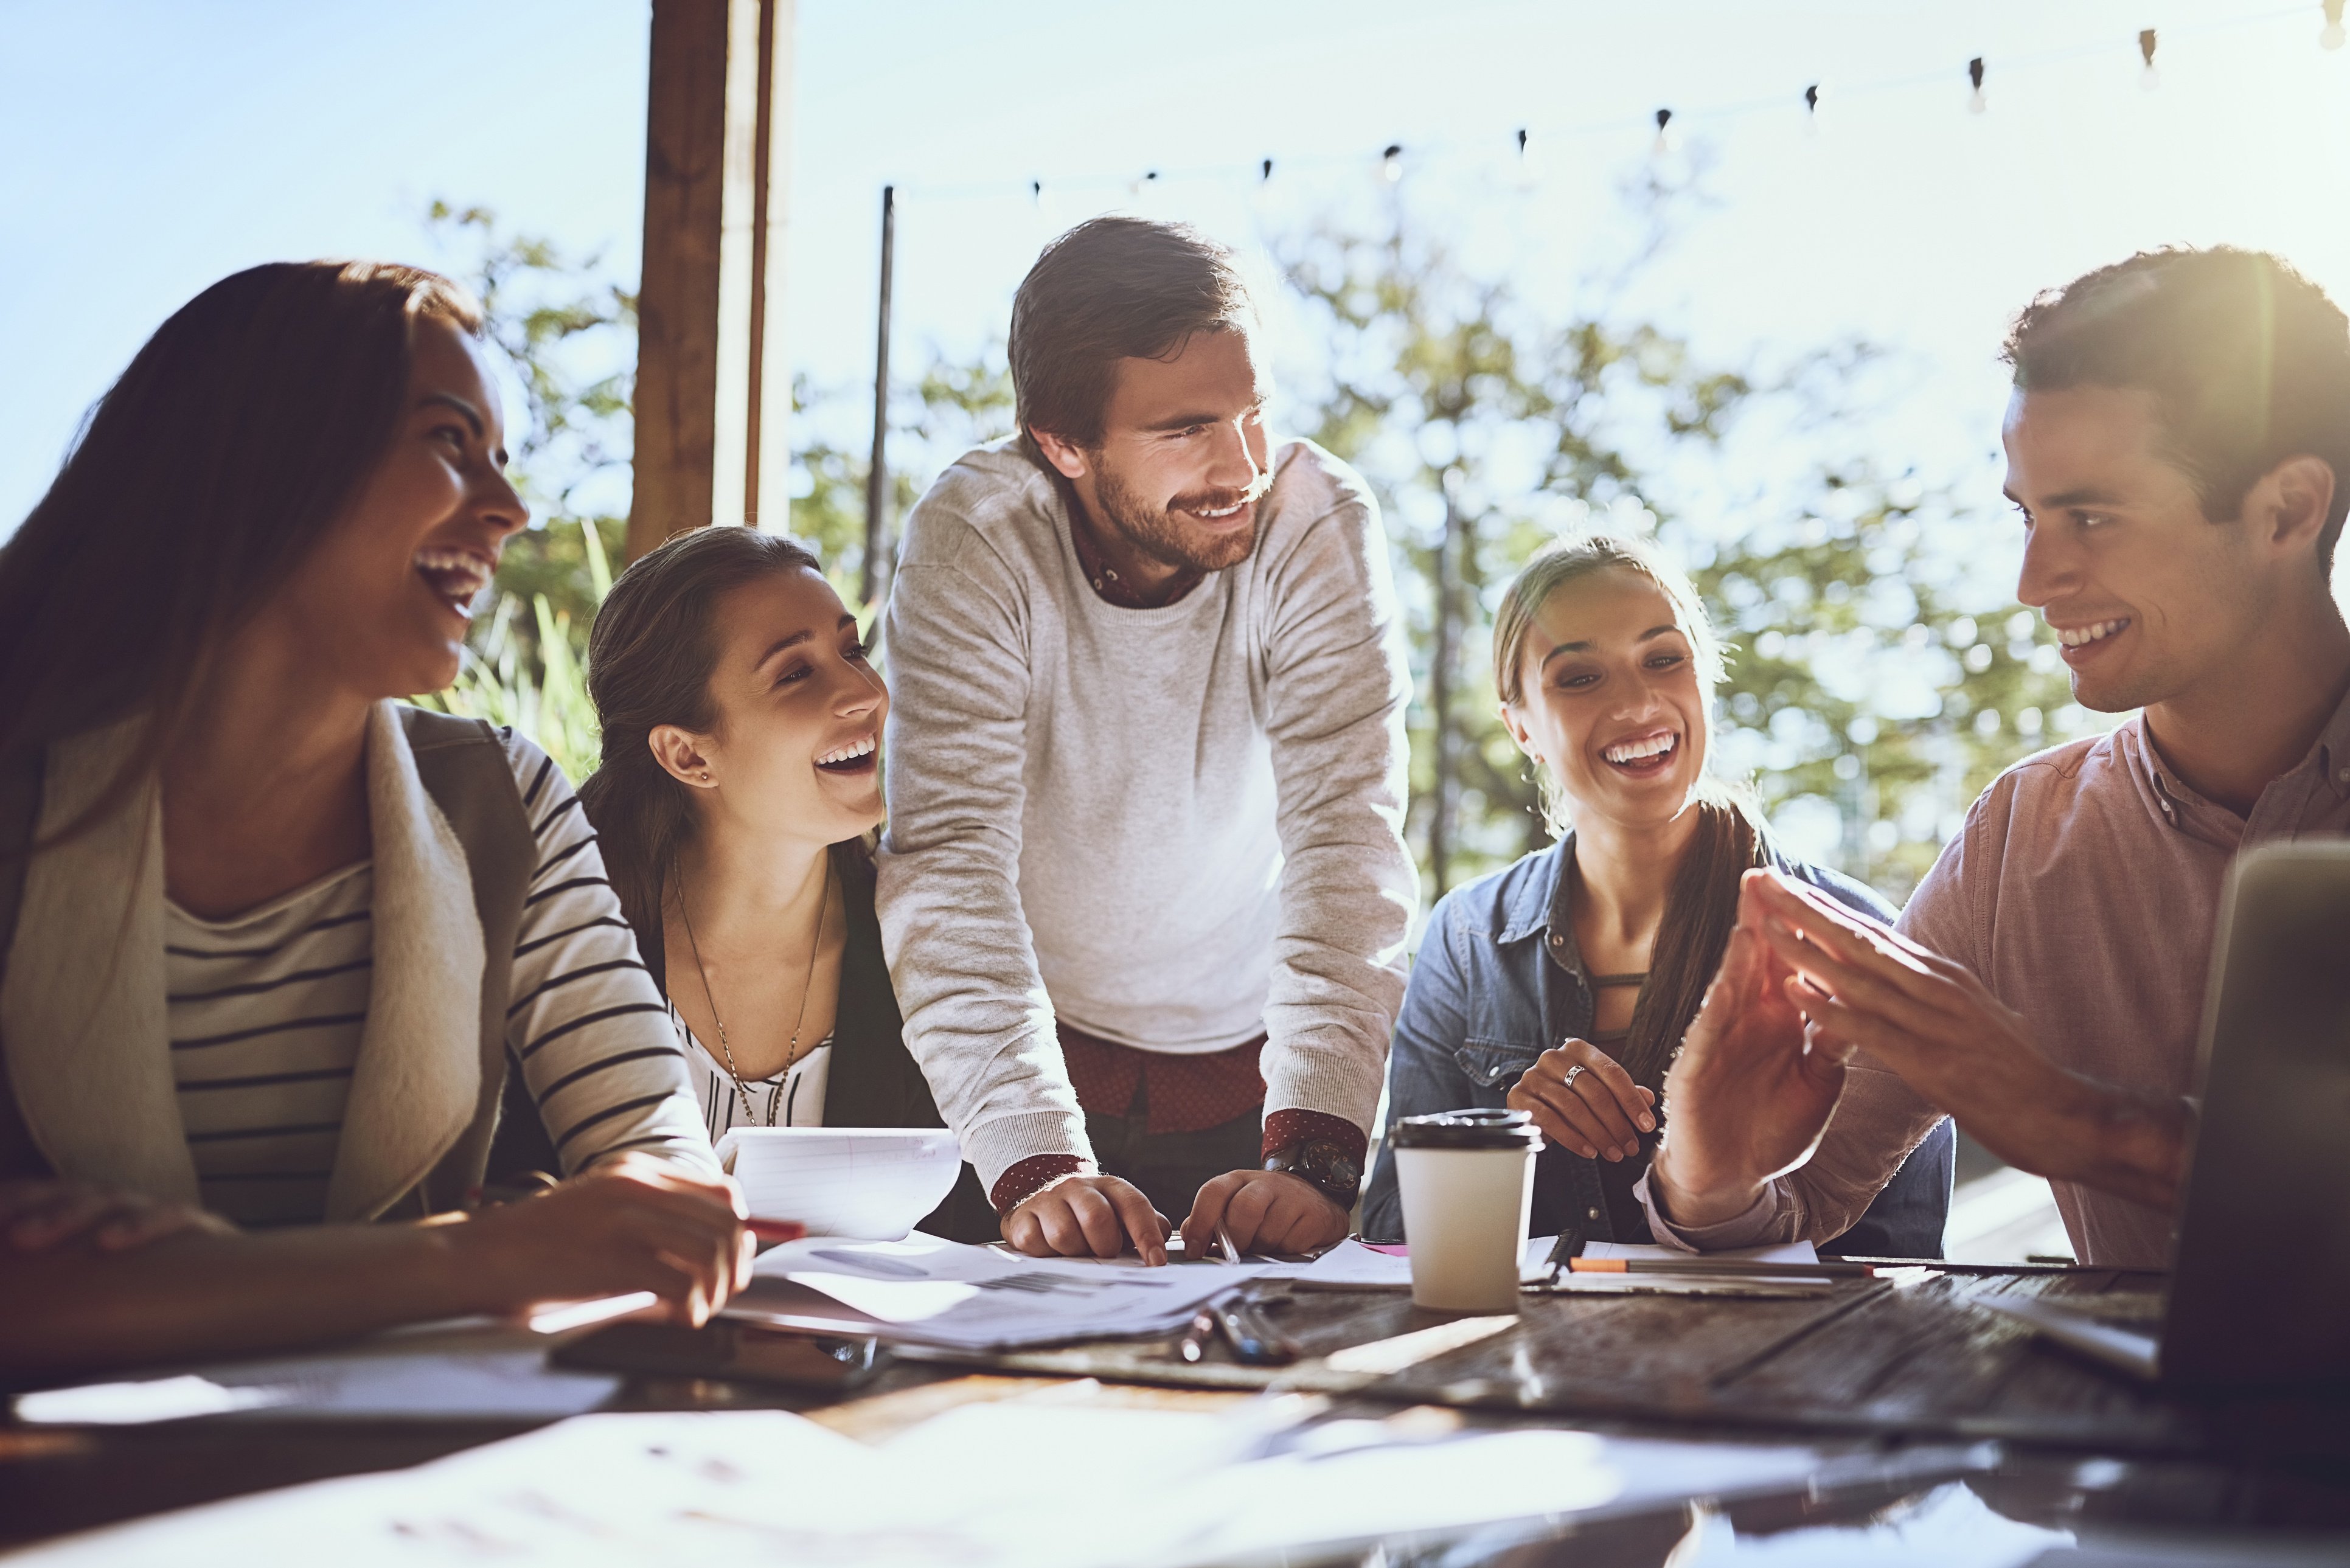 50 Employee Engagement Ideas to Seriously Boost Engagement